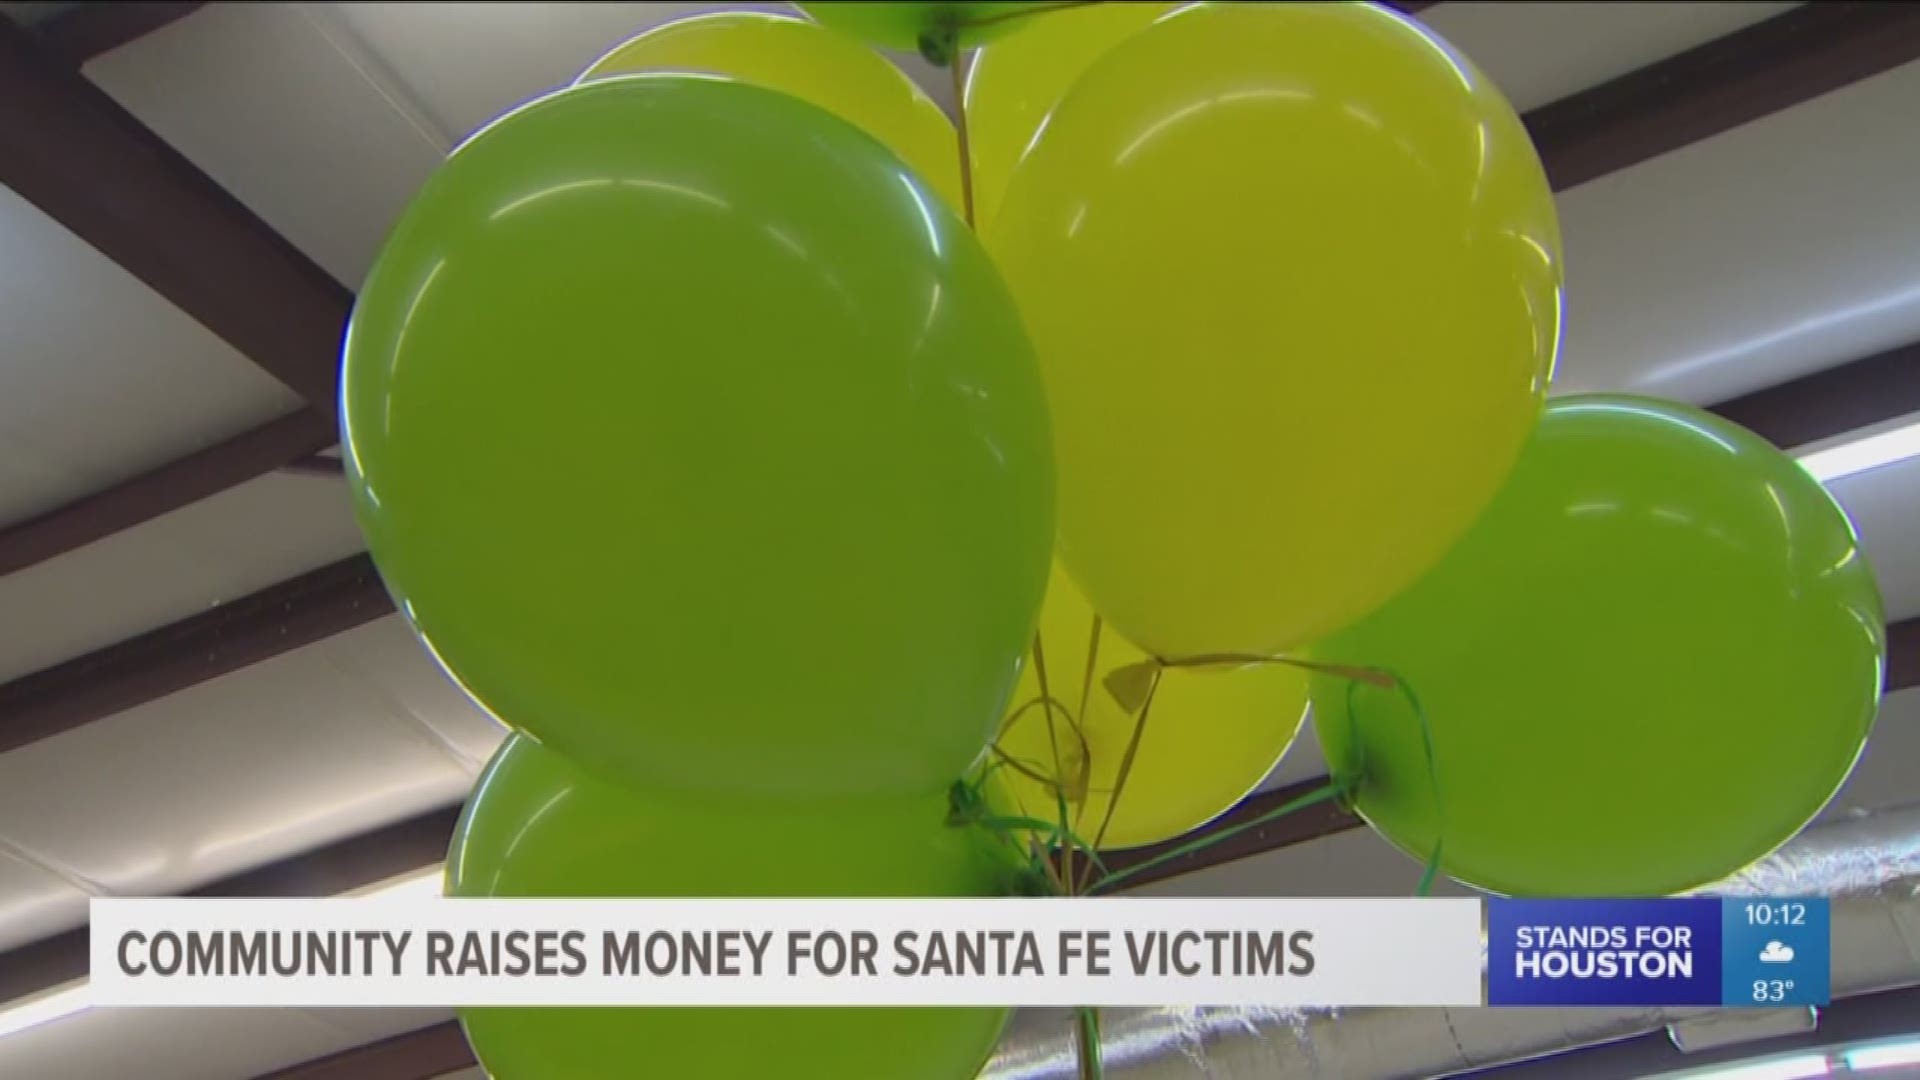 The Santa Fe community came together once again to raise money for the families of shooting victims.